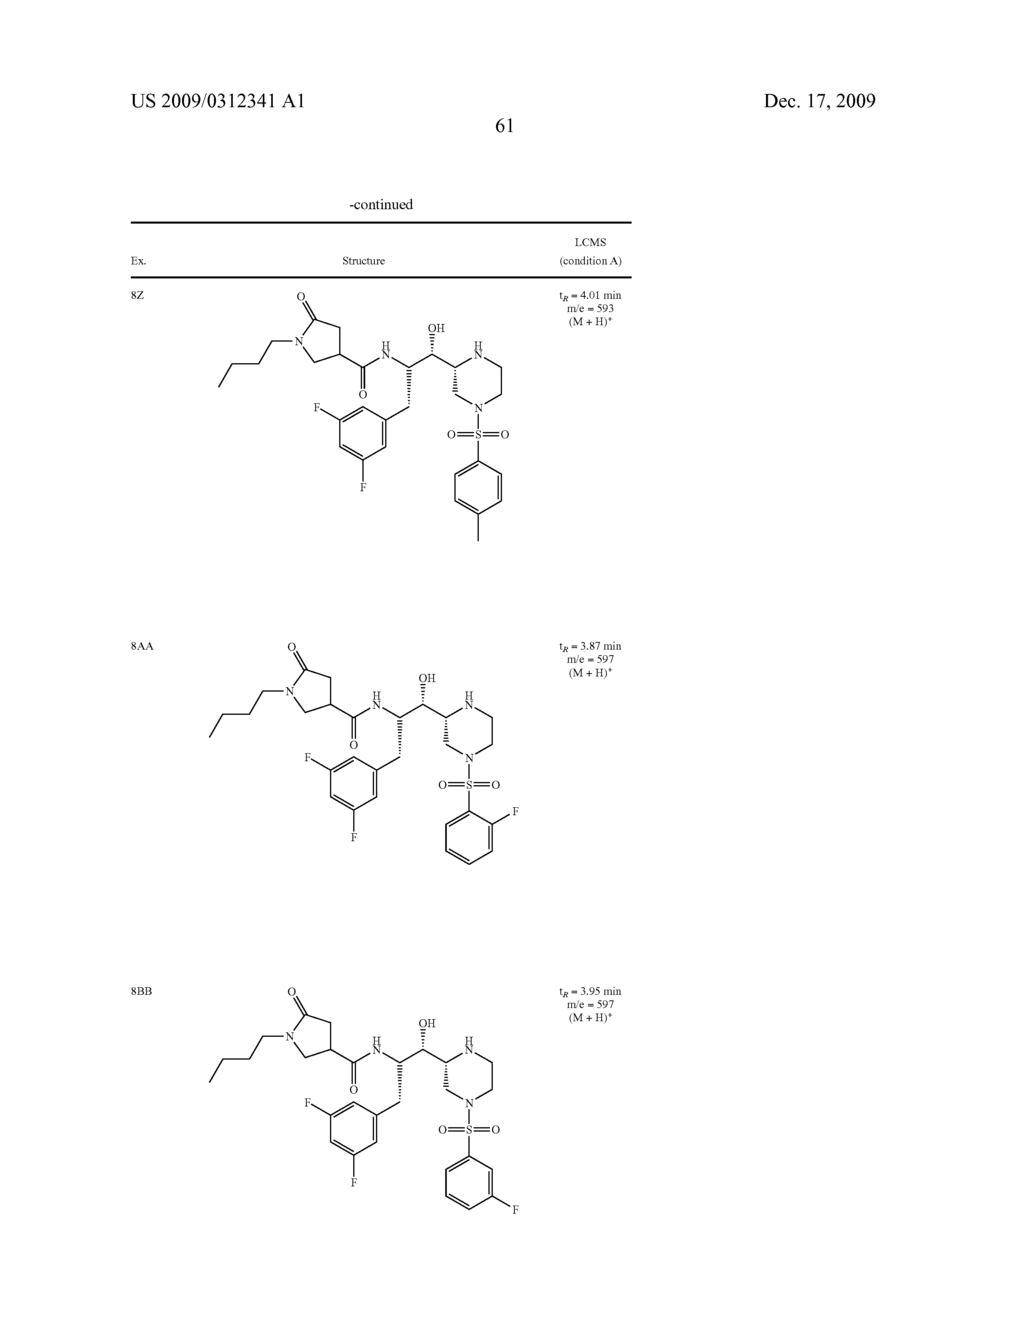 CYCLIC AMINE BACE-1 INHIBITORS HAVING A HETEROCYCLIC SUBSTITUENT - diagram, schematic, and image 62